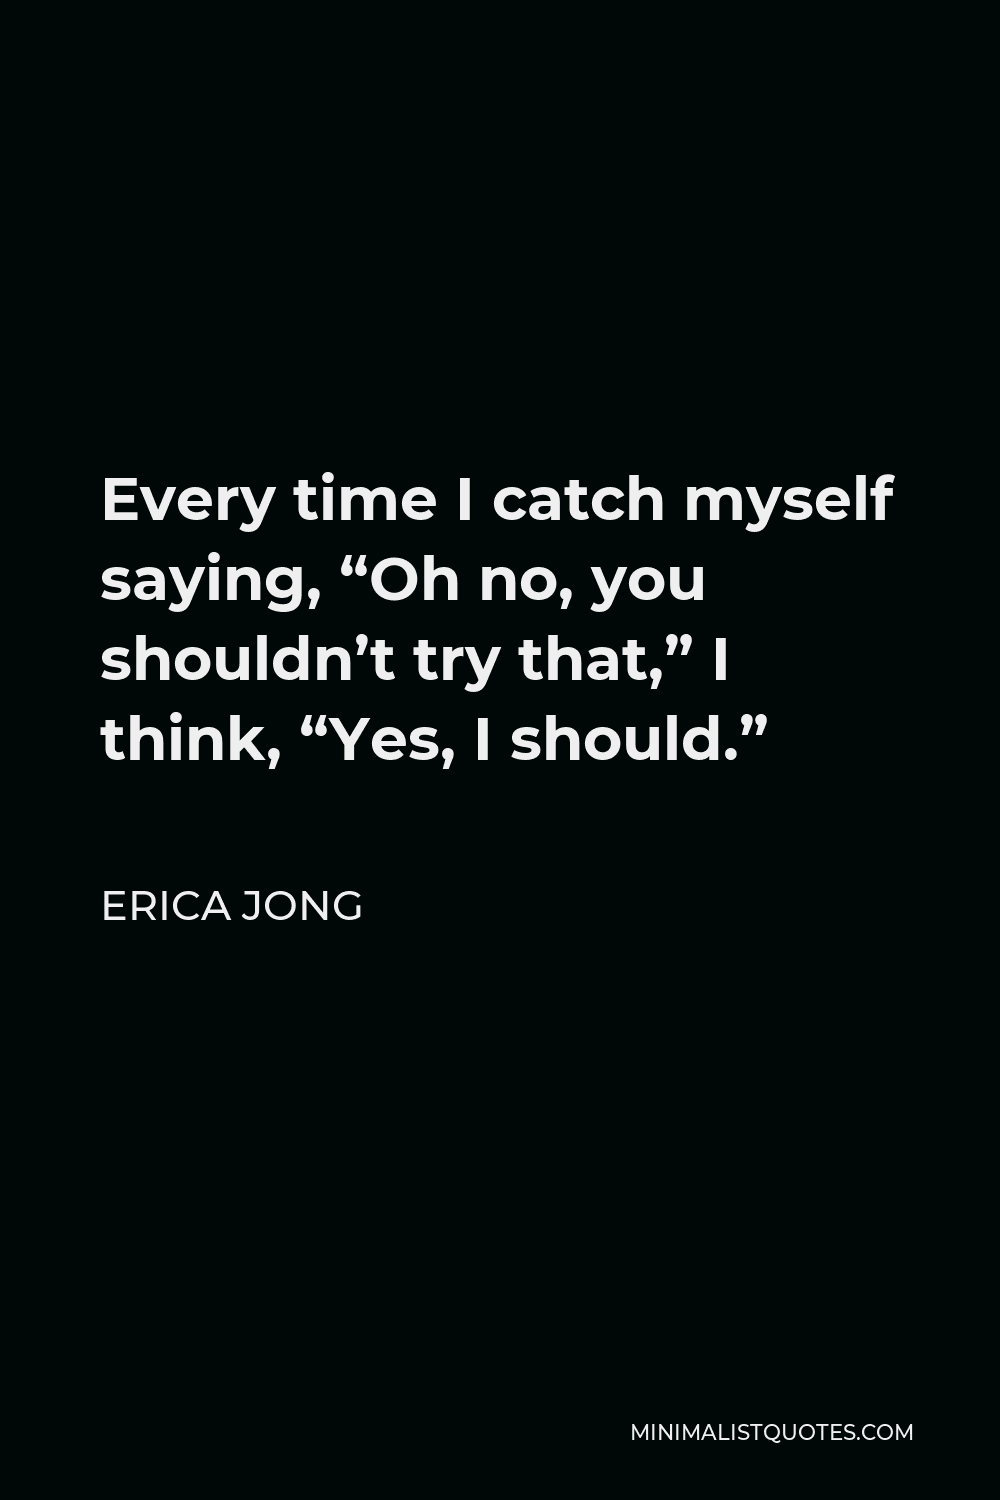 Erica Jong Quote - Every time I catch myself saying, “Oh no, you shouldn’t try that,” I think, “Yes, I should.”